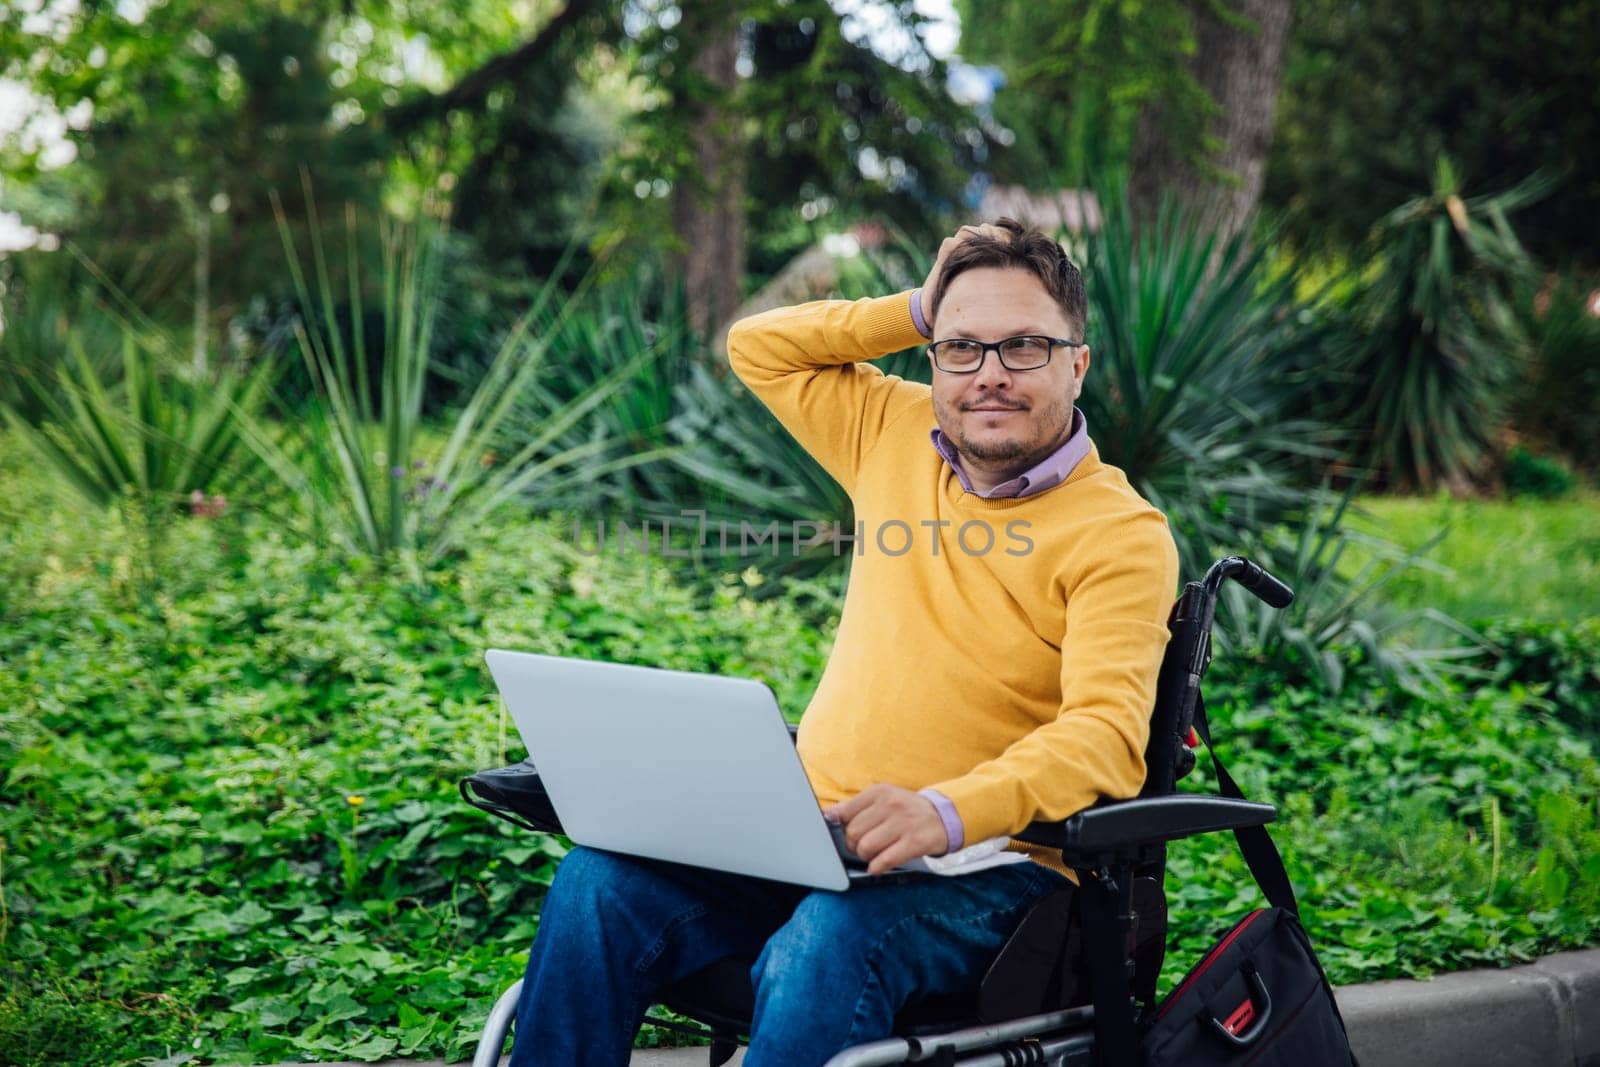 special person with disabilities with a laptop in the park